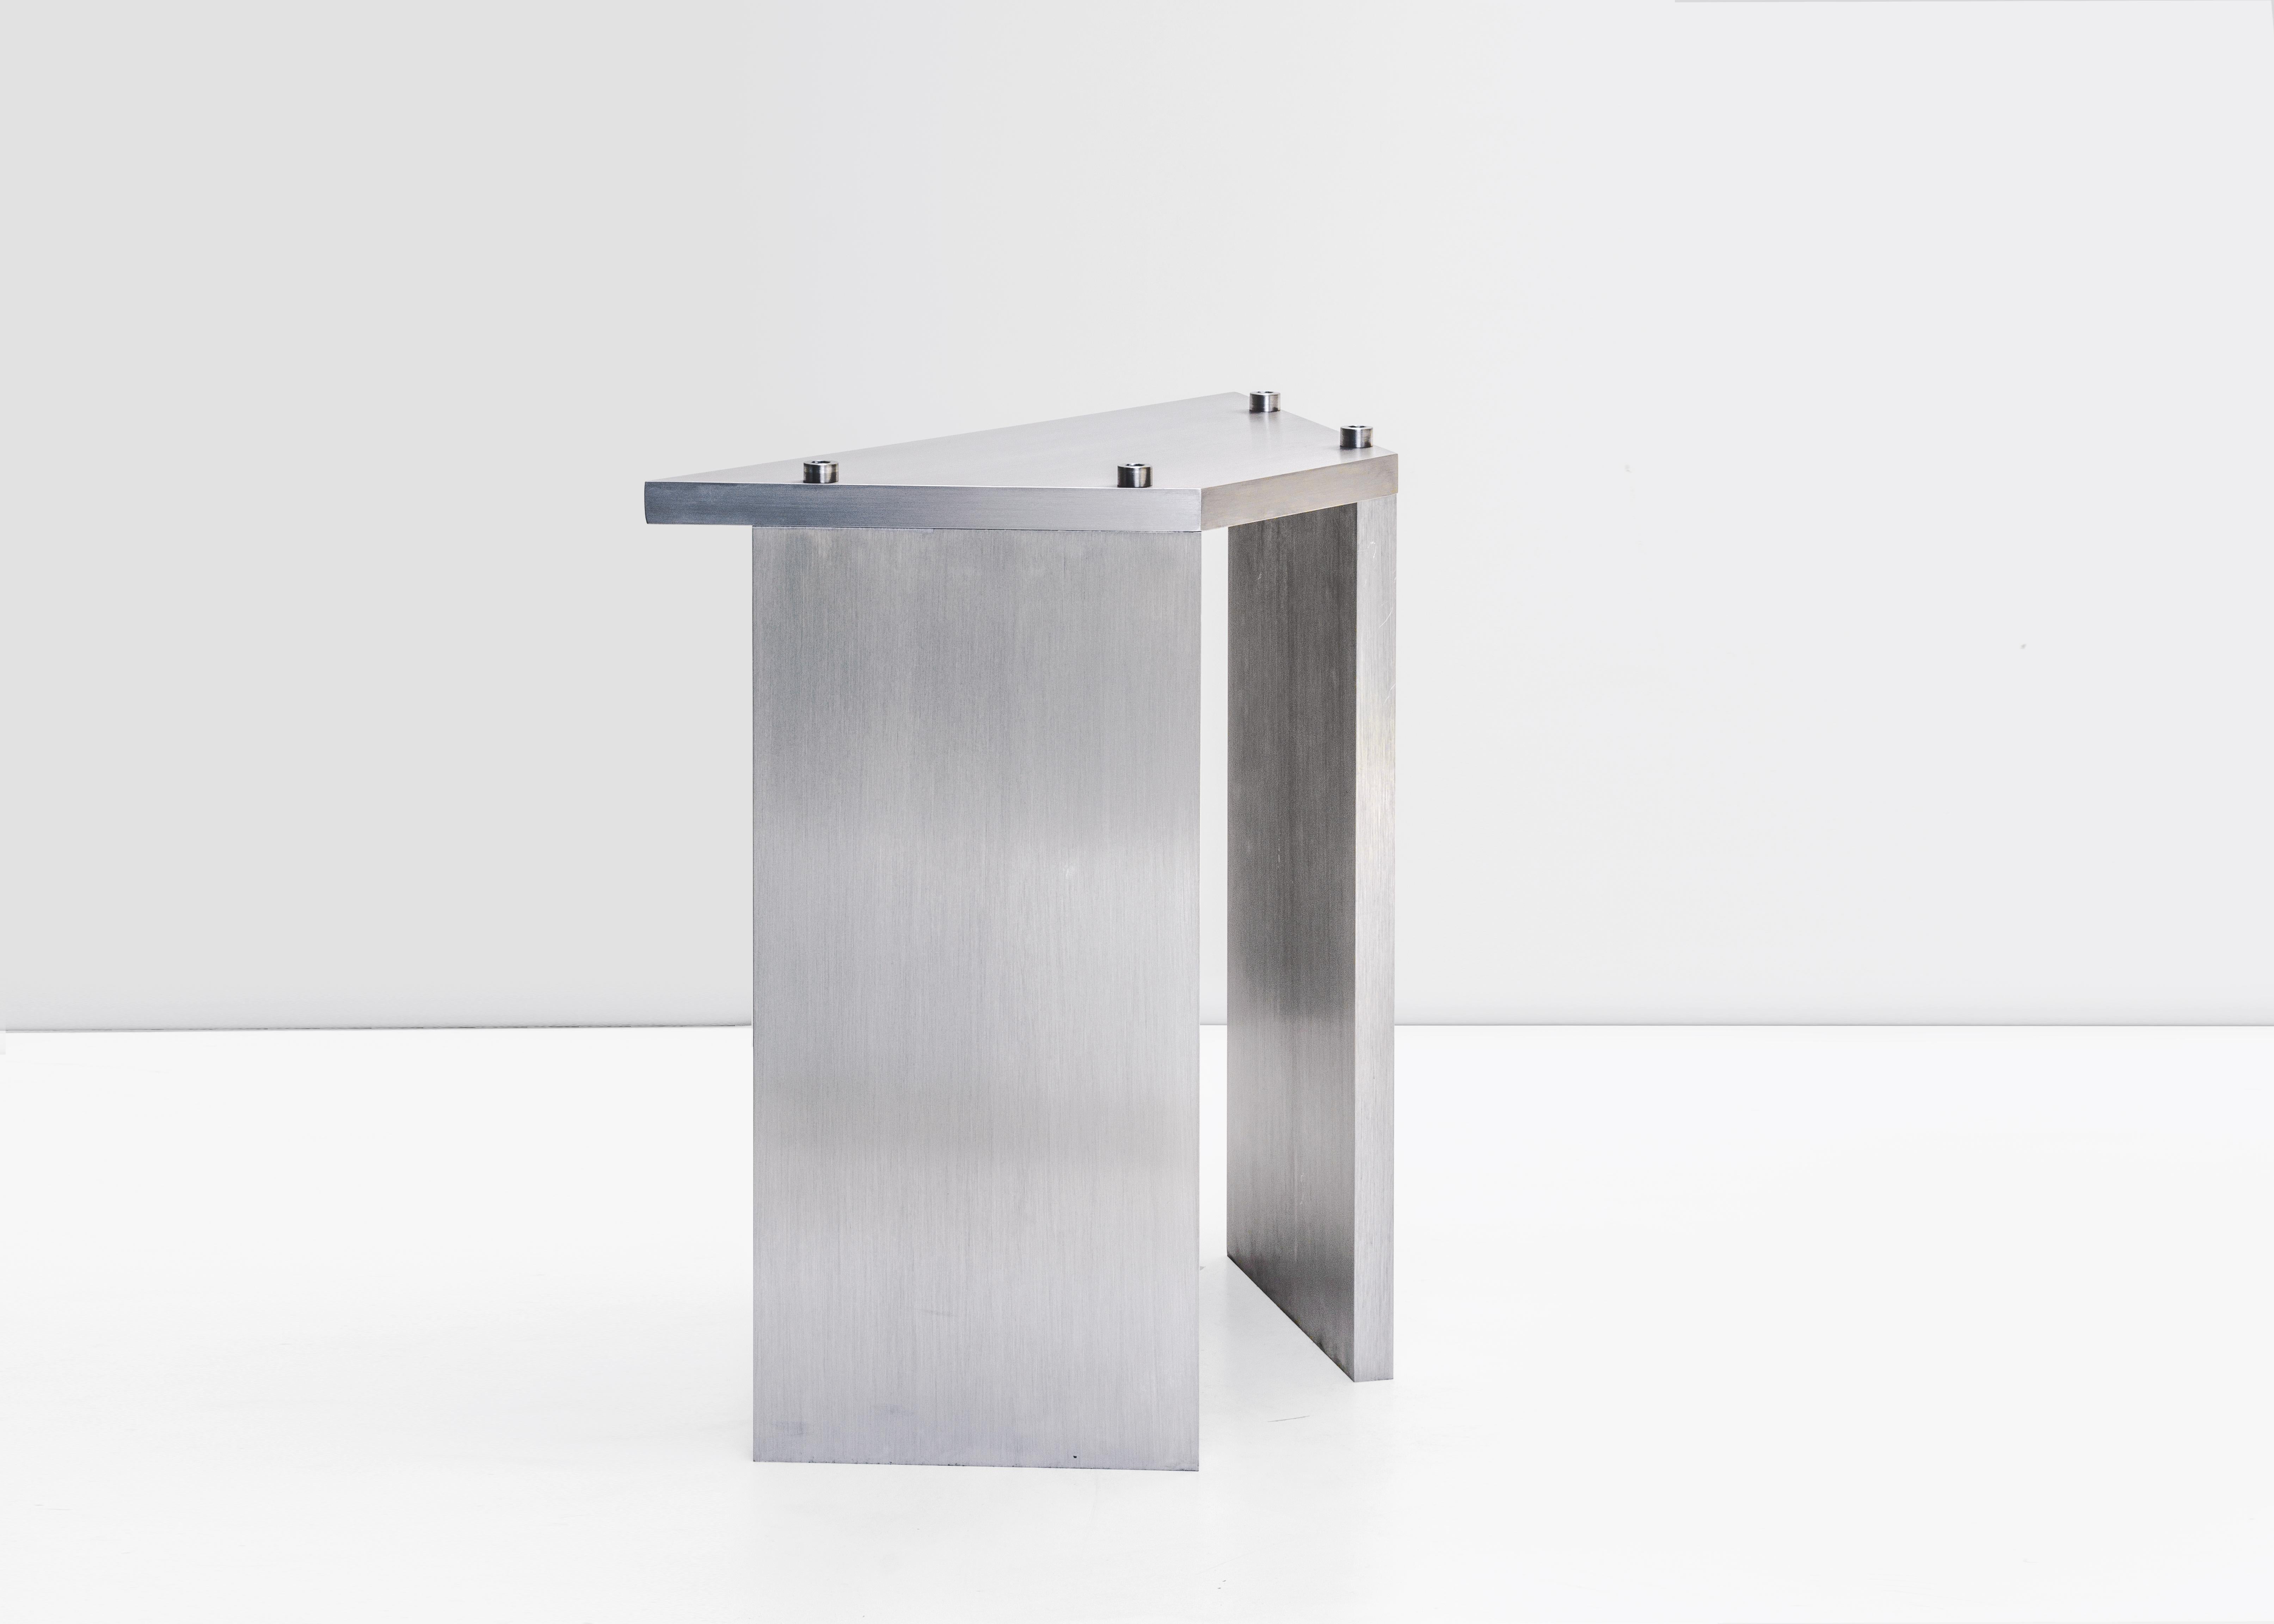 Contemporary stackable stool by Johan Viladrich.
Material: Anodised aluminum, stainless steel bolts
Measures: L 43, W 20, H 45 cm.
Apprx. 15kg
Limited edition of 200 + 20AP

The table is composed of two brushed aluminium plates leaning onto